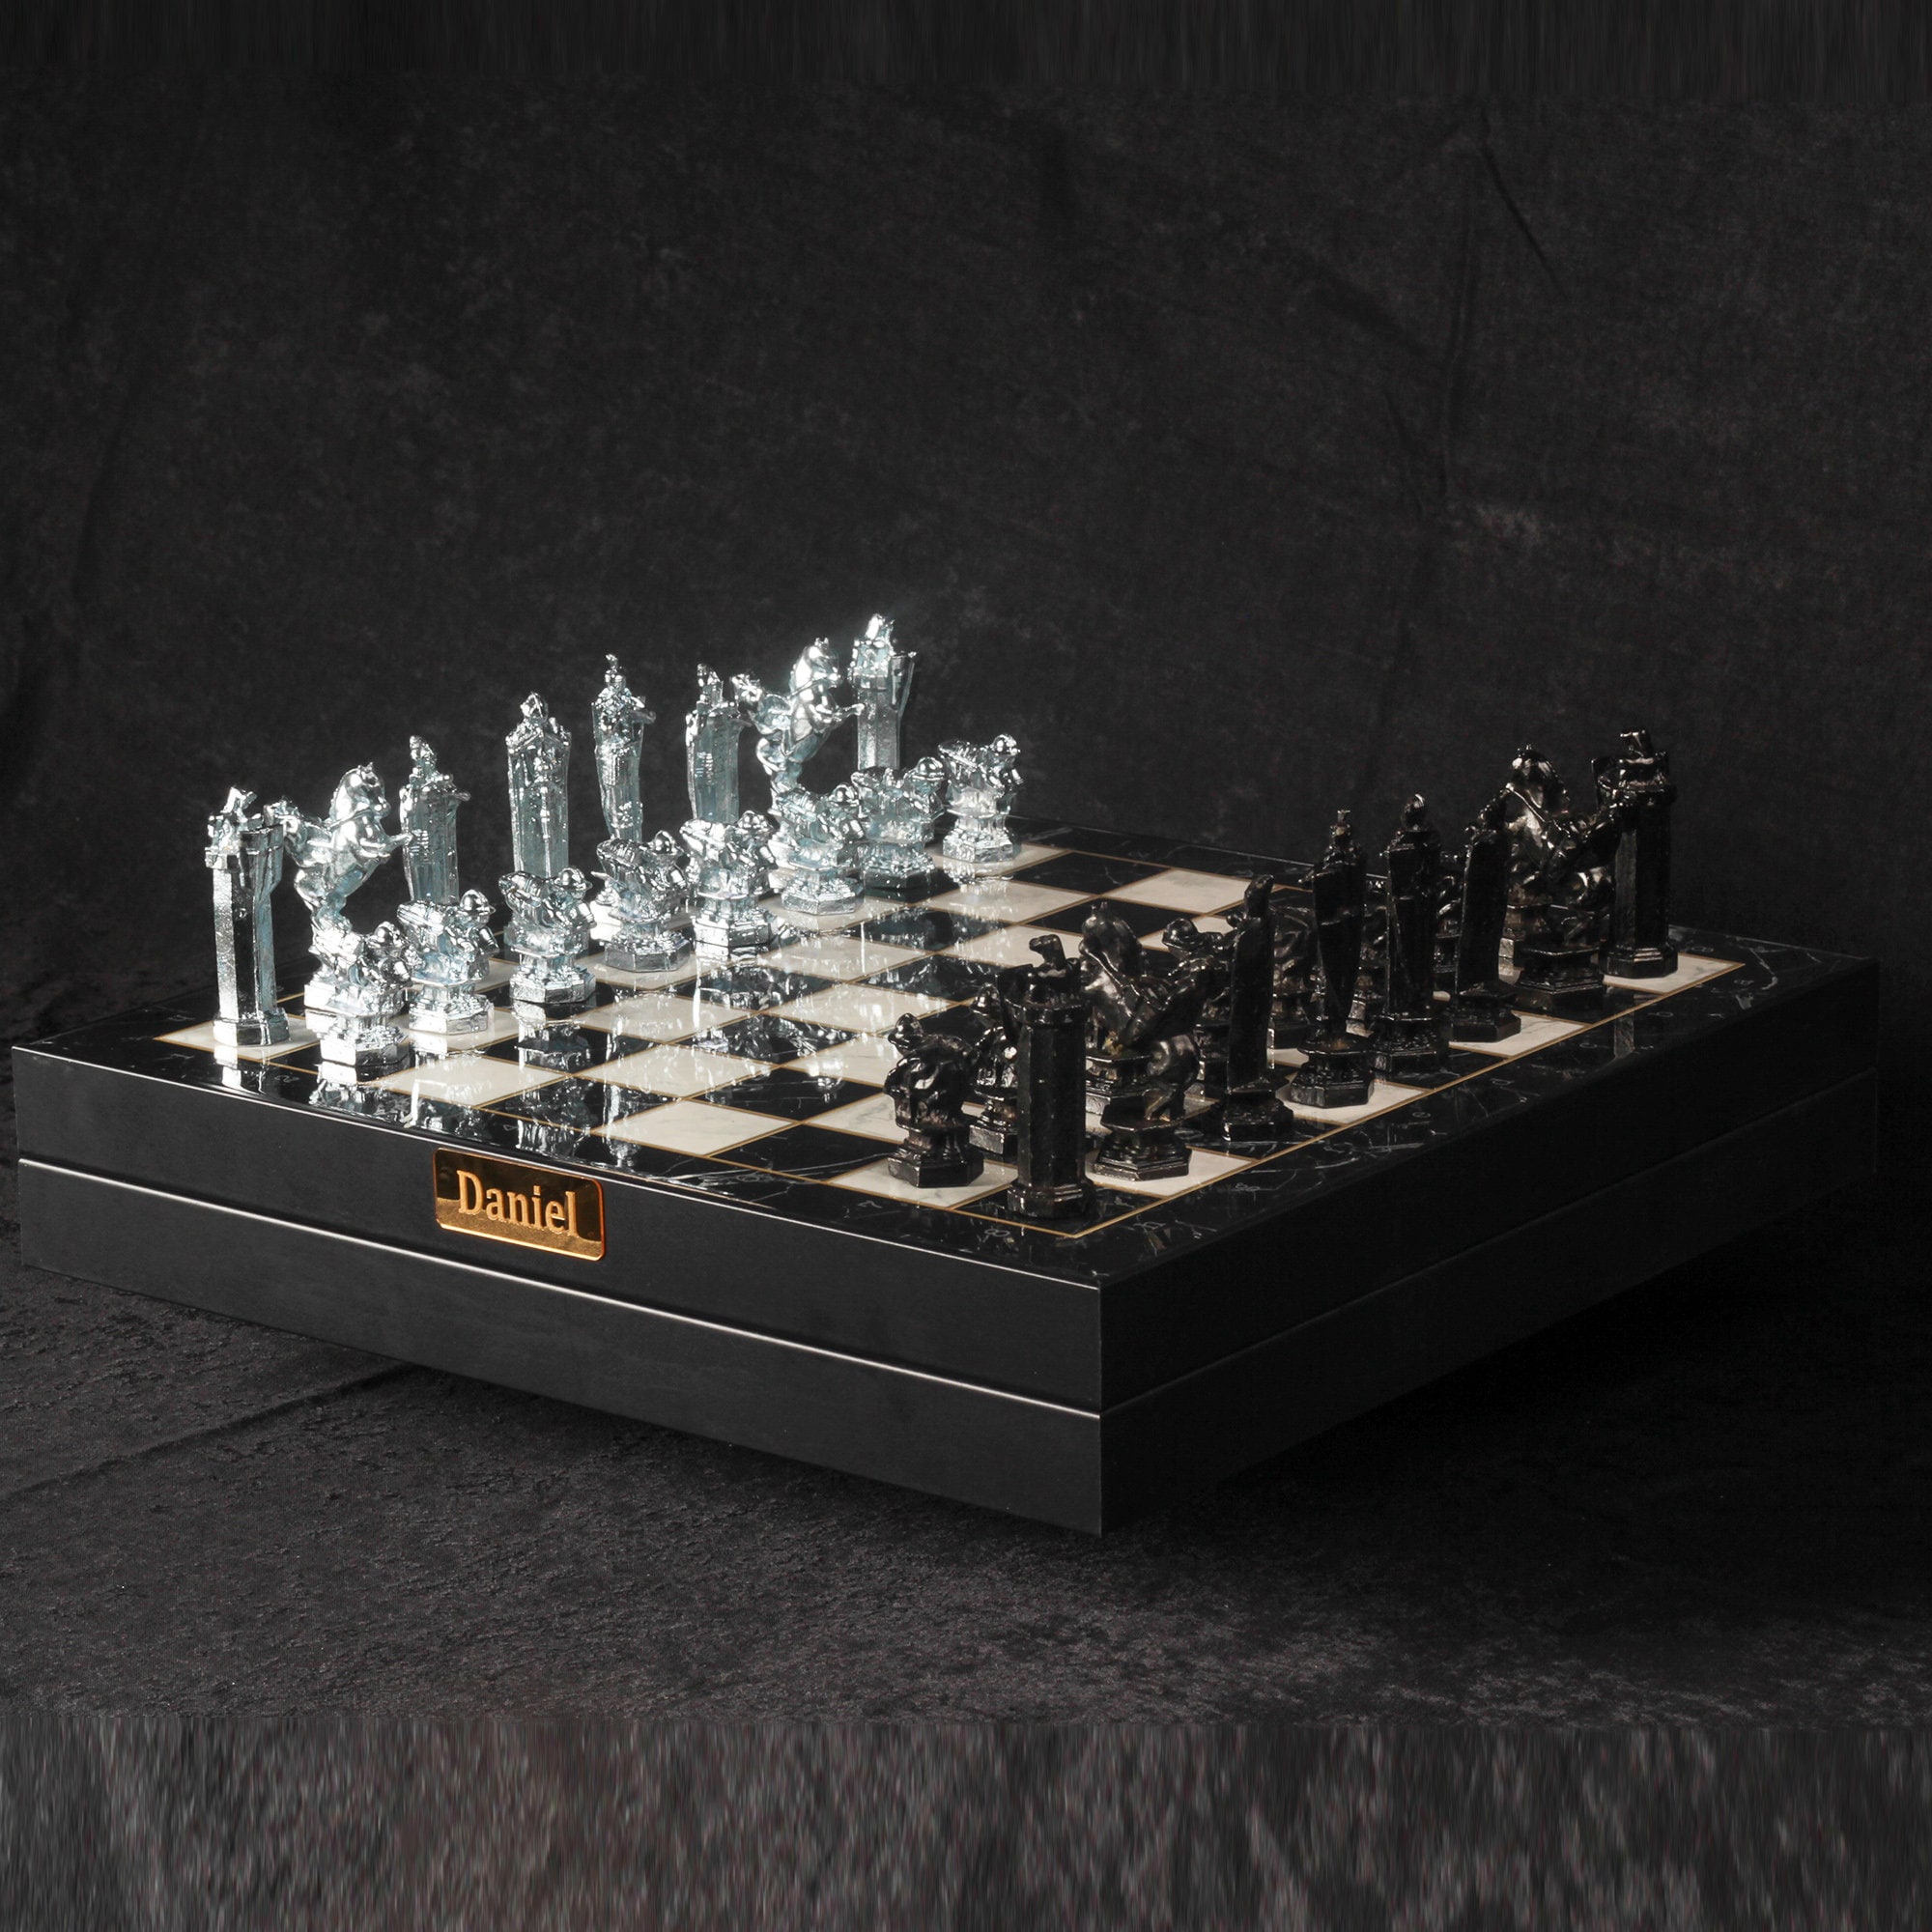 IWIS Metal Chess Pieces Only No Board in Unique Storage Box, Gifts for Men,  Women, 32 Large Quadruple Weighted Chess Pieces, 2 Extra Queen, 2.6” King